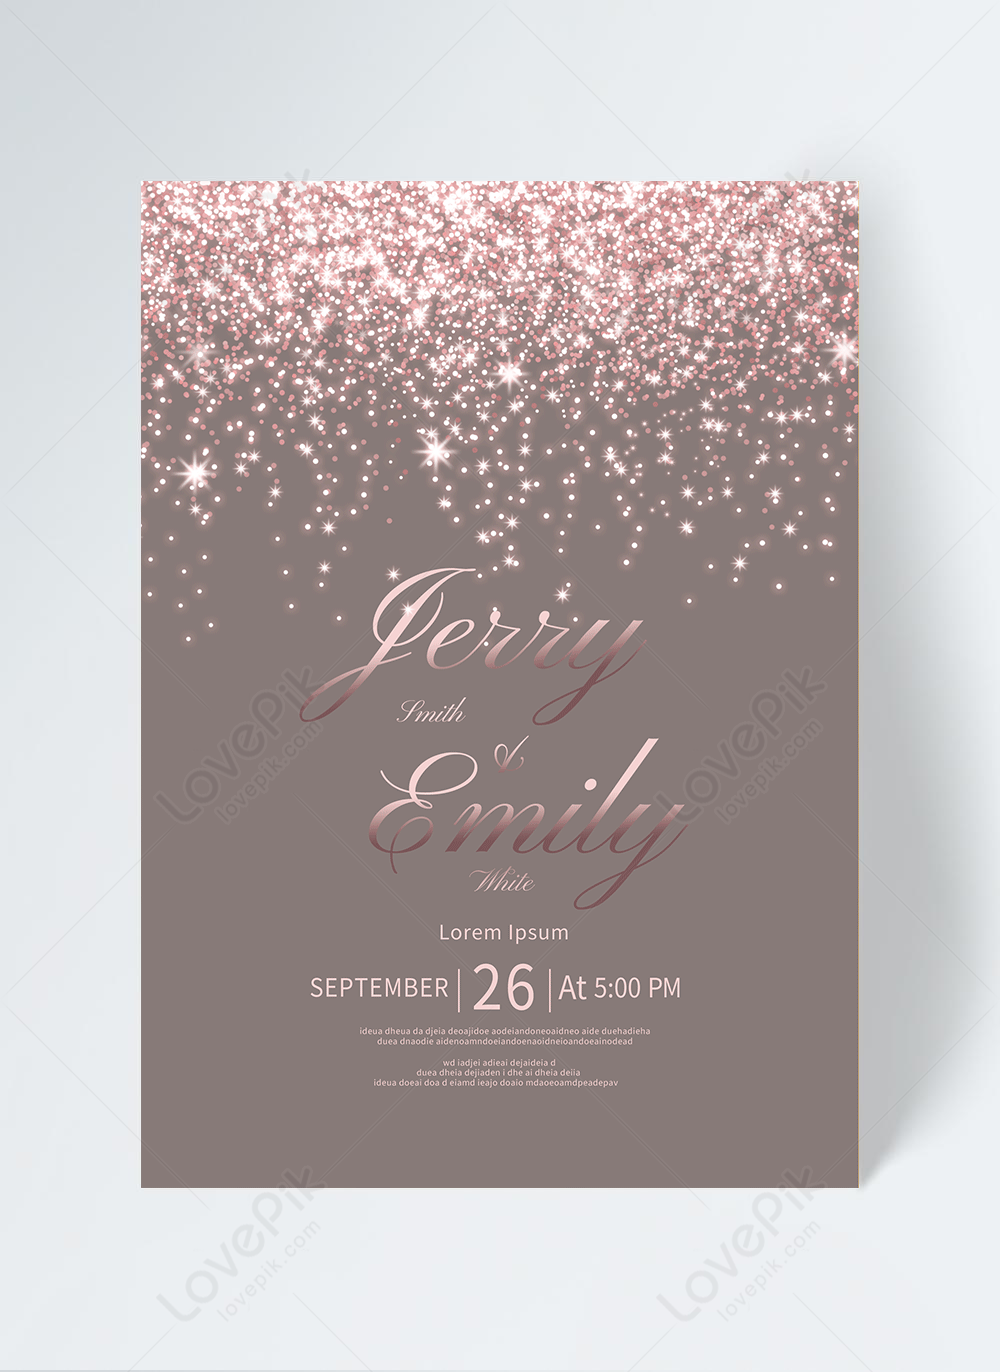 rose gold glitter wedding invitation template image_picture free